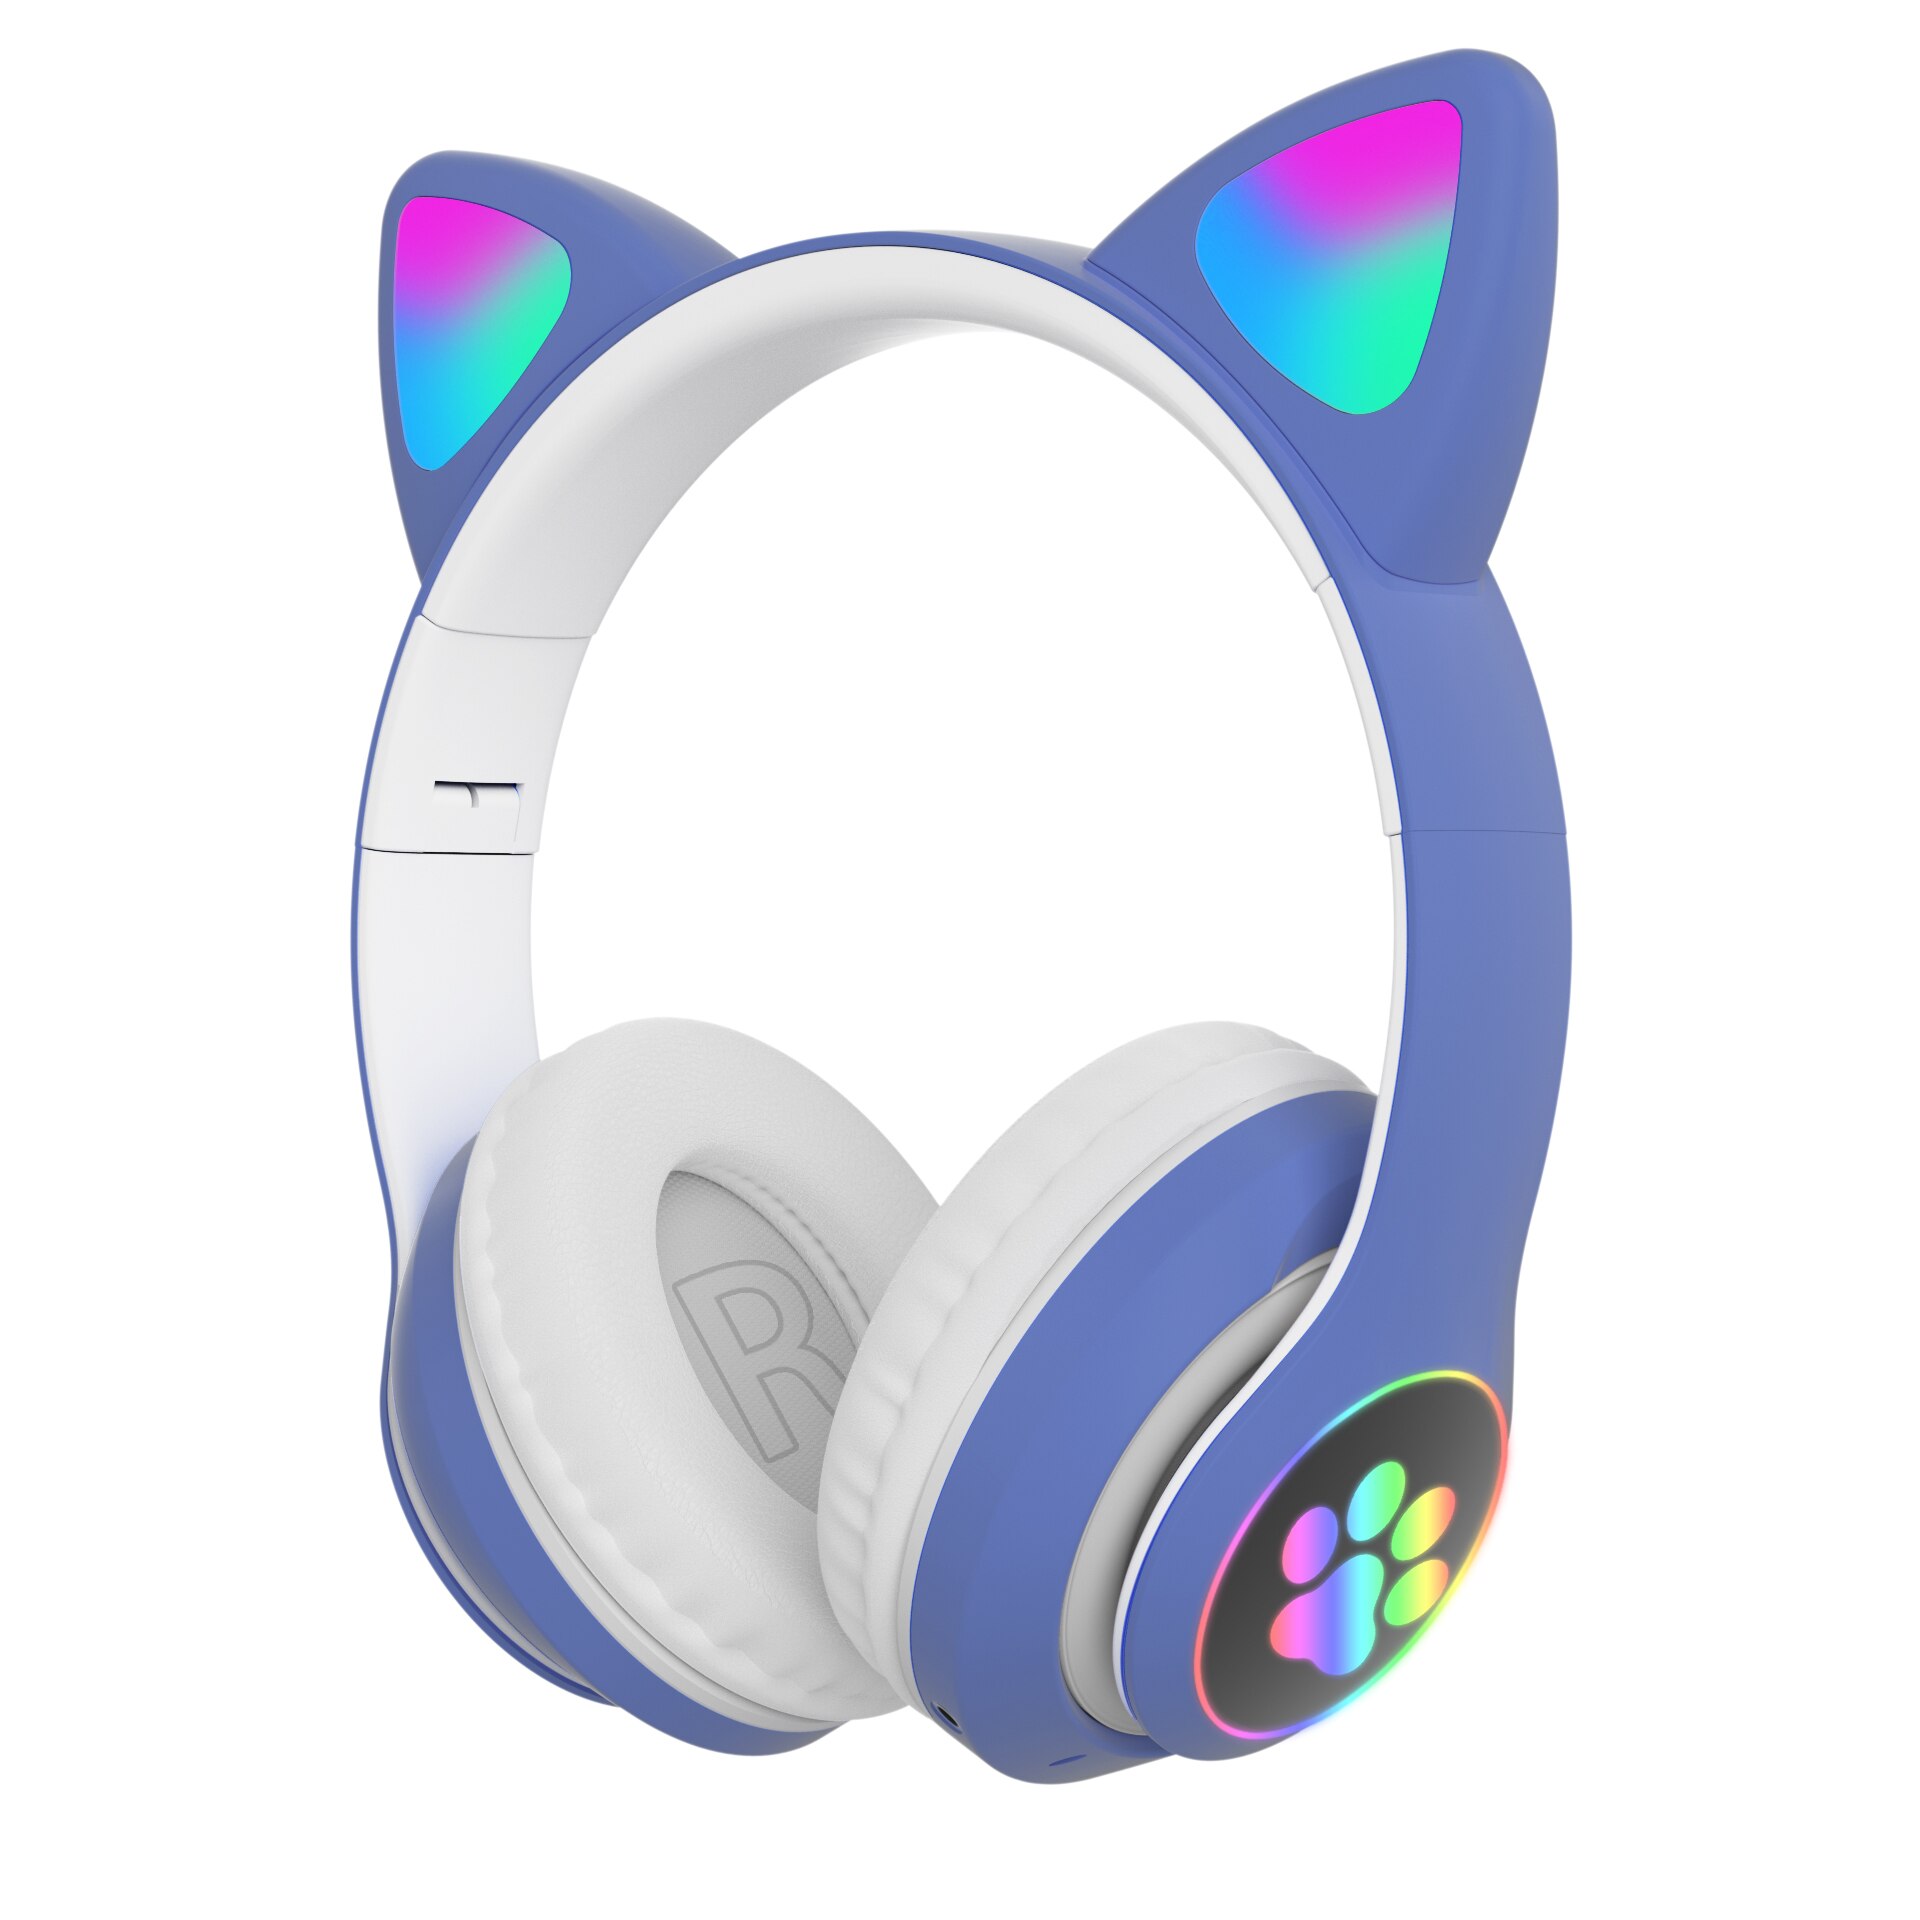 Flash Light Cute Cat Ear Headphones Wireless with Mic Can close LED Kids Girls Stereo Phone Music Bluetooth Headset Gamer: Blue